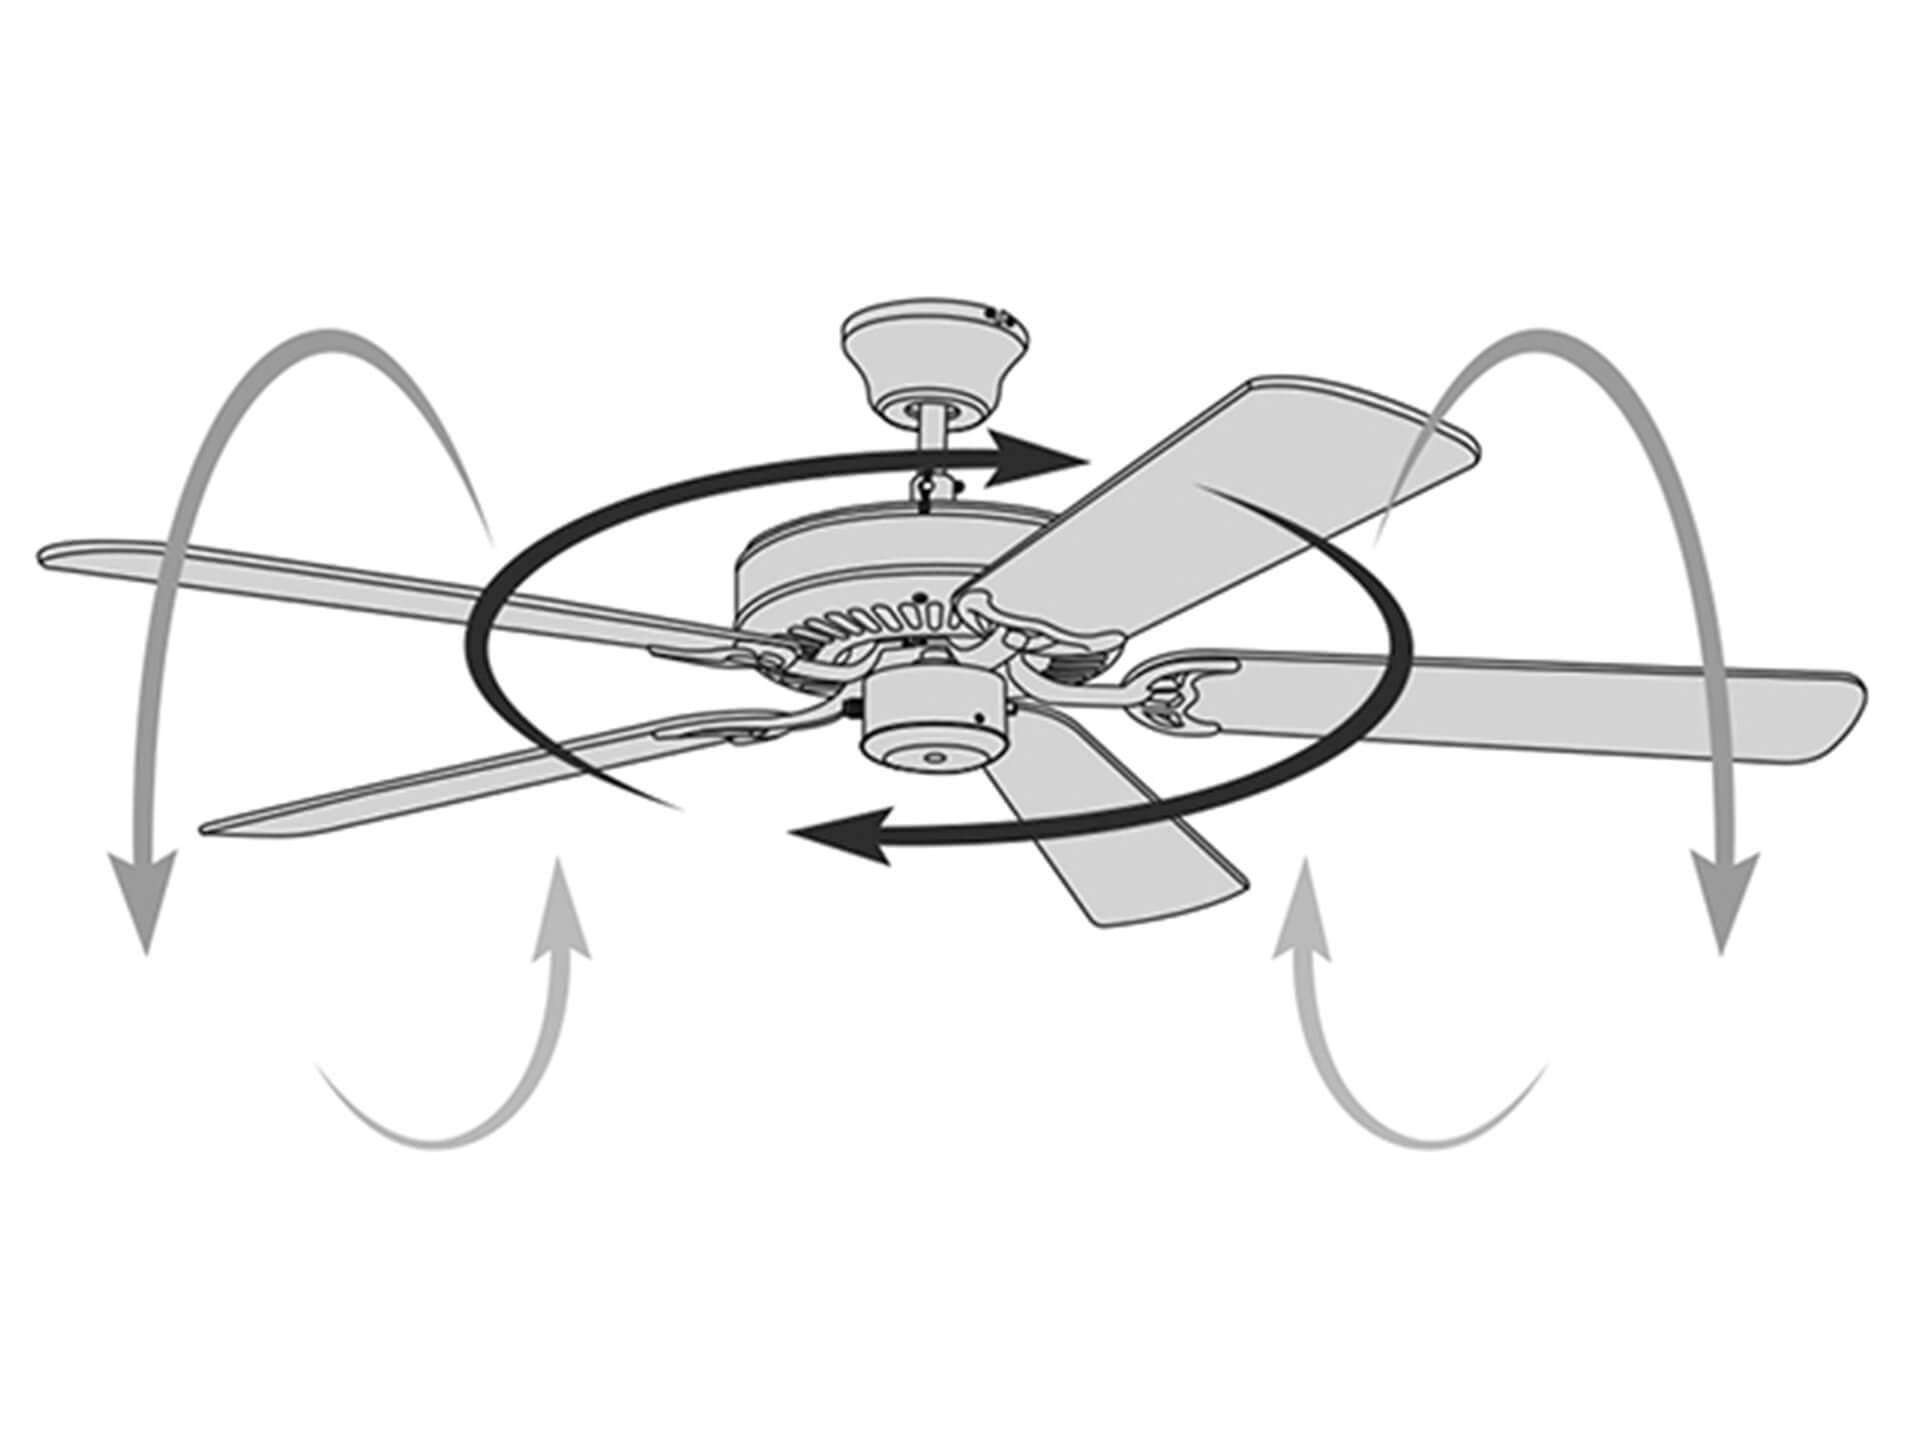 Illustrated fan demonstrating air flow being pulled up and around.